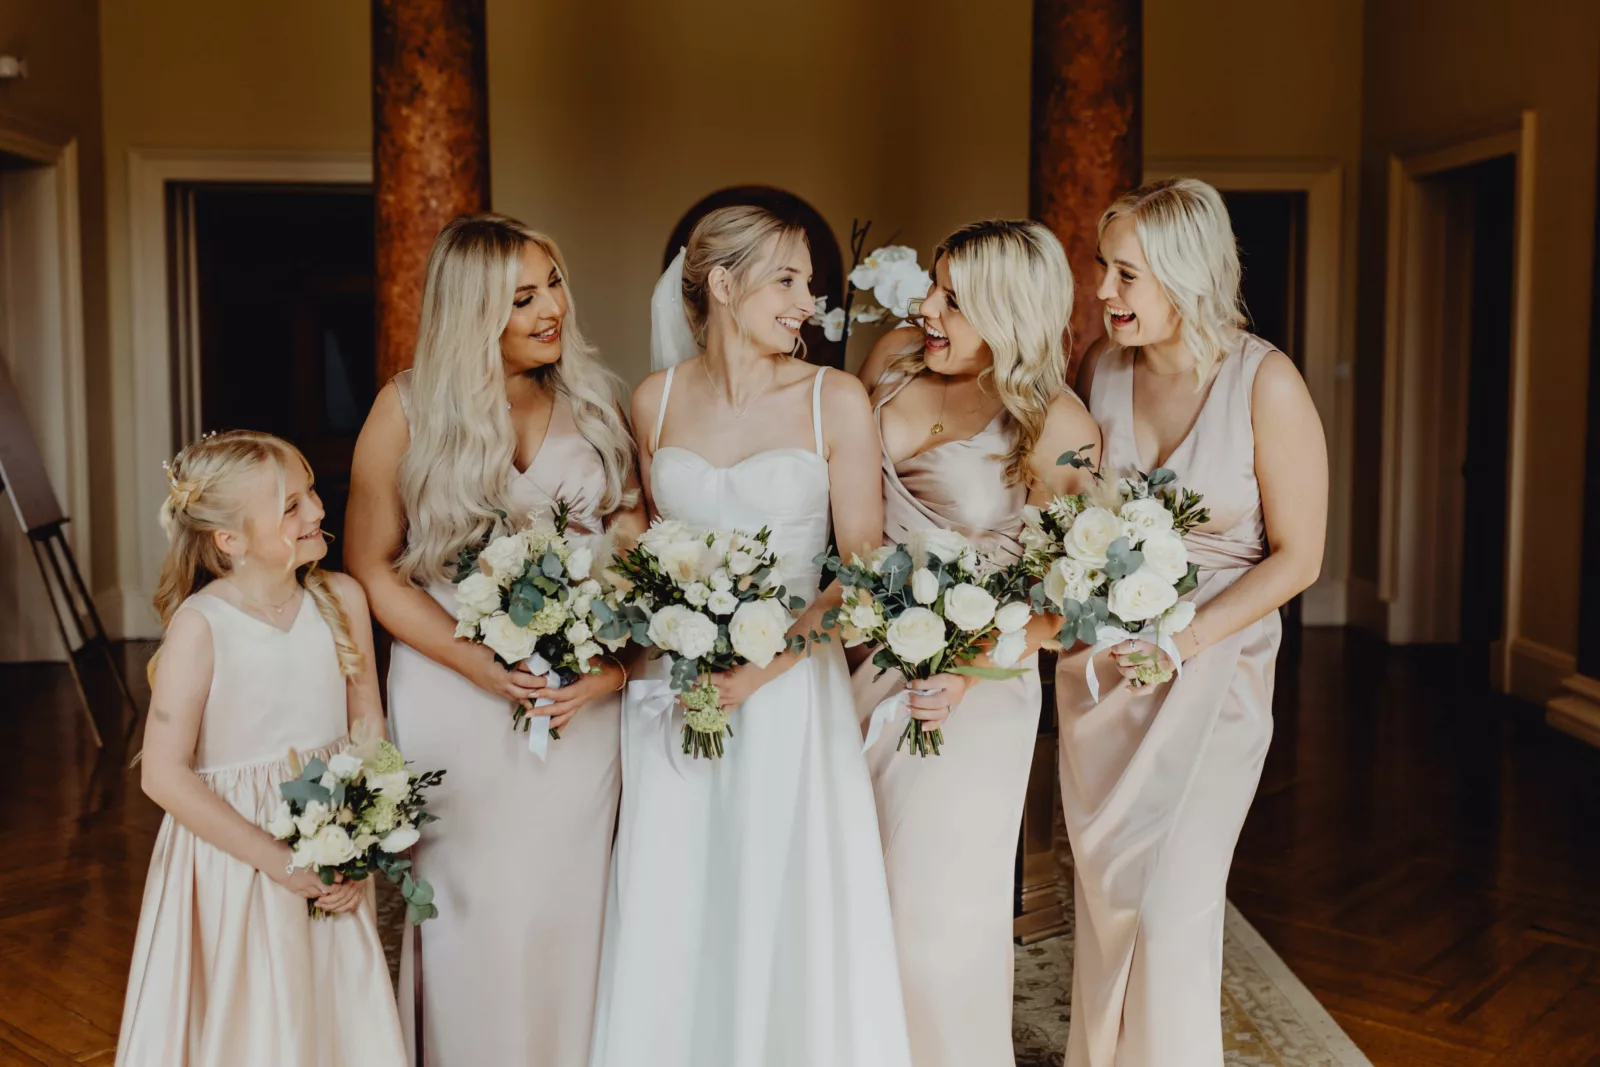 Dine Venues | Rise Hall | Exclusive wedding weekends Yorkshire | Real Wedding | Emilia Kate Photography